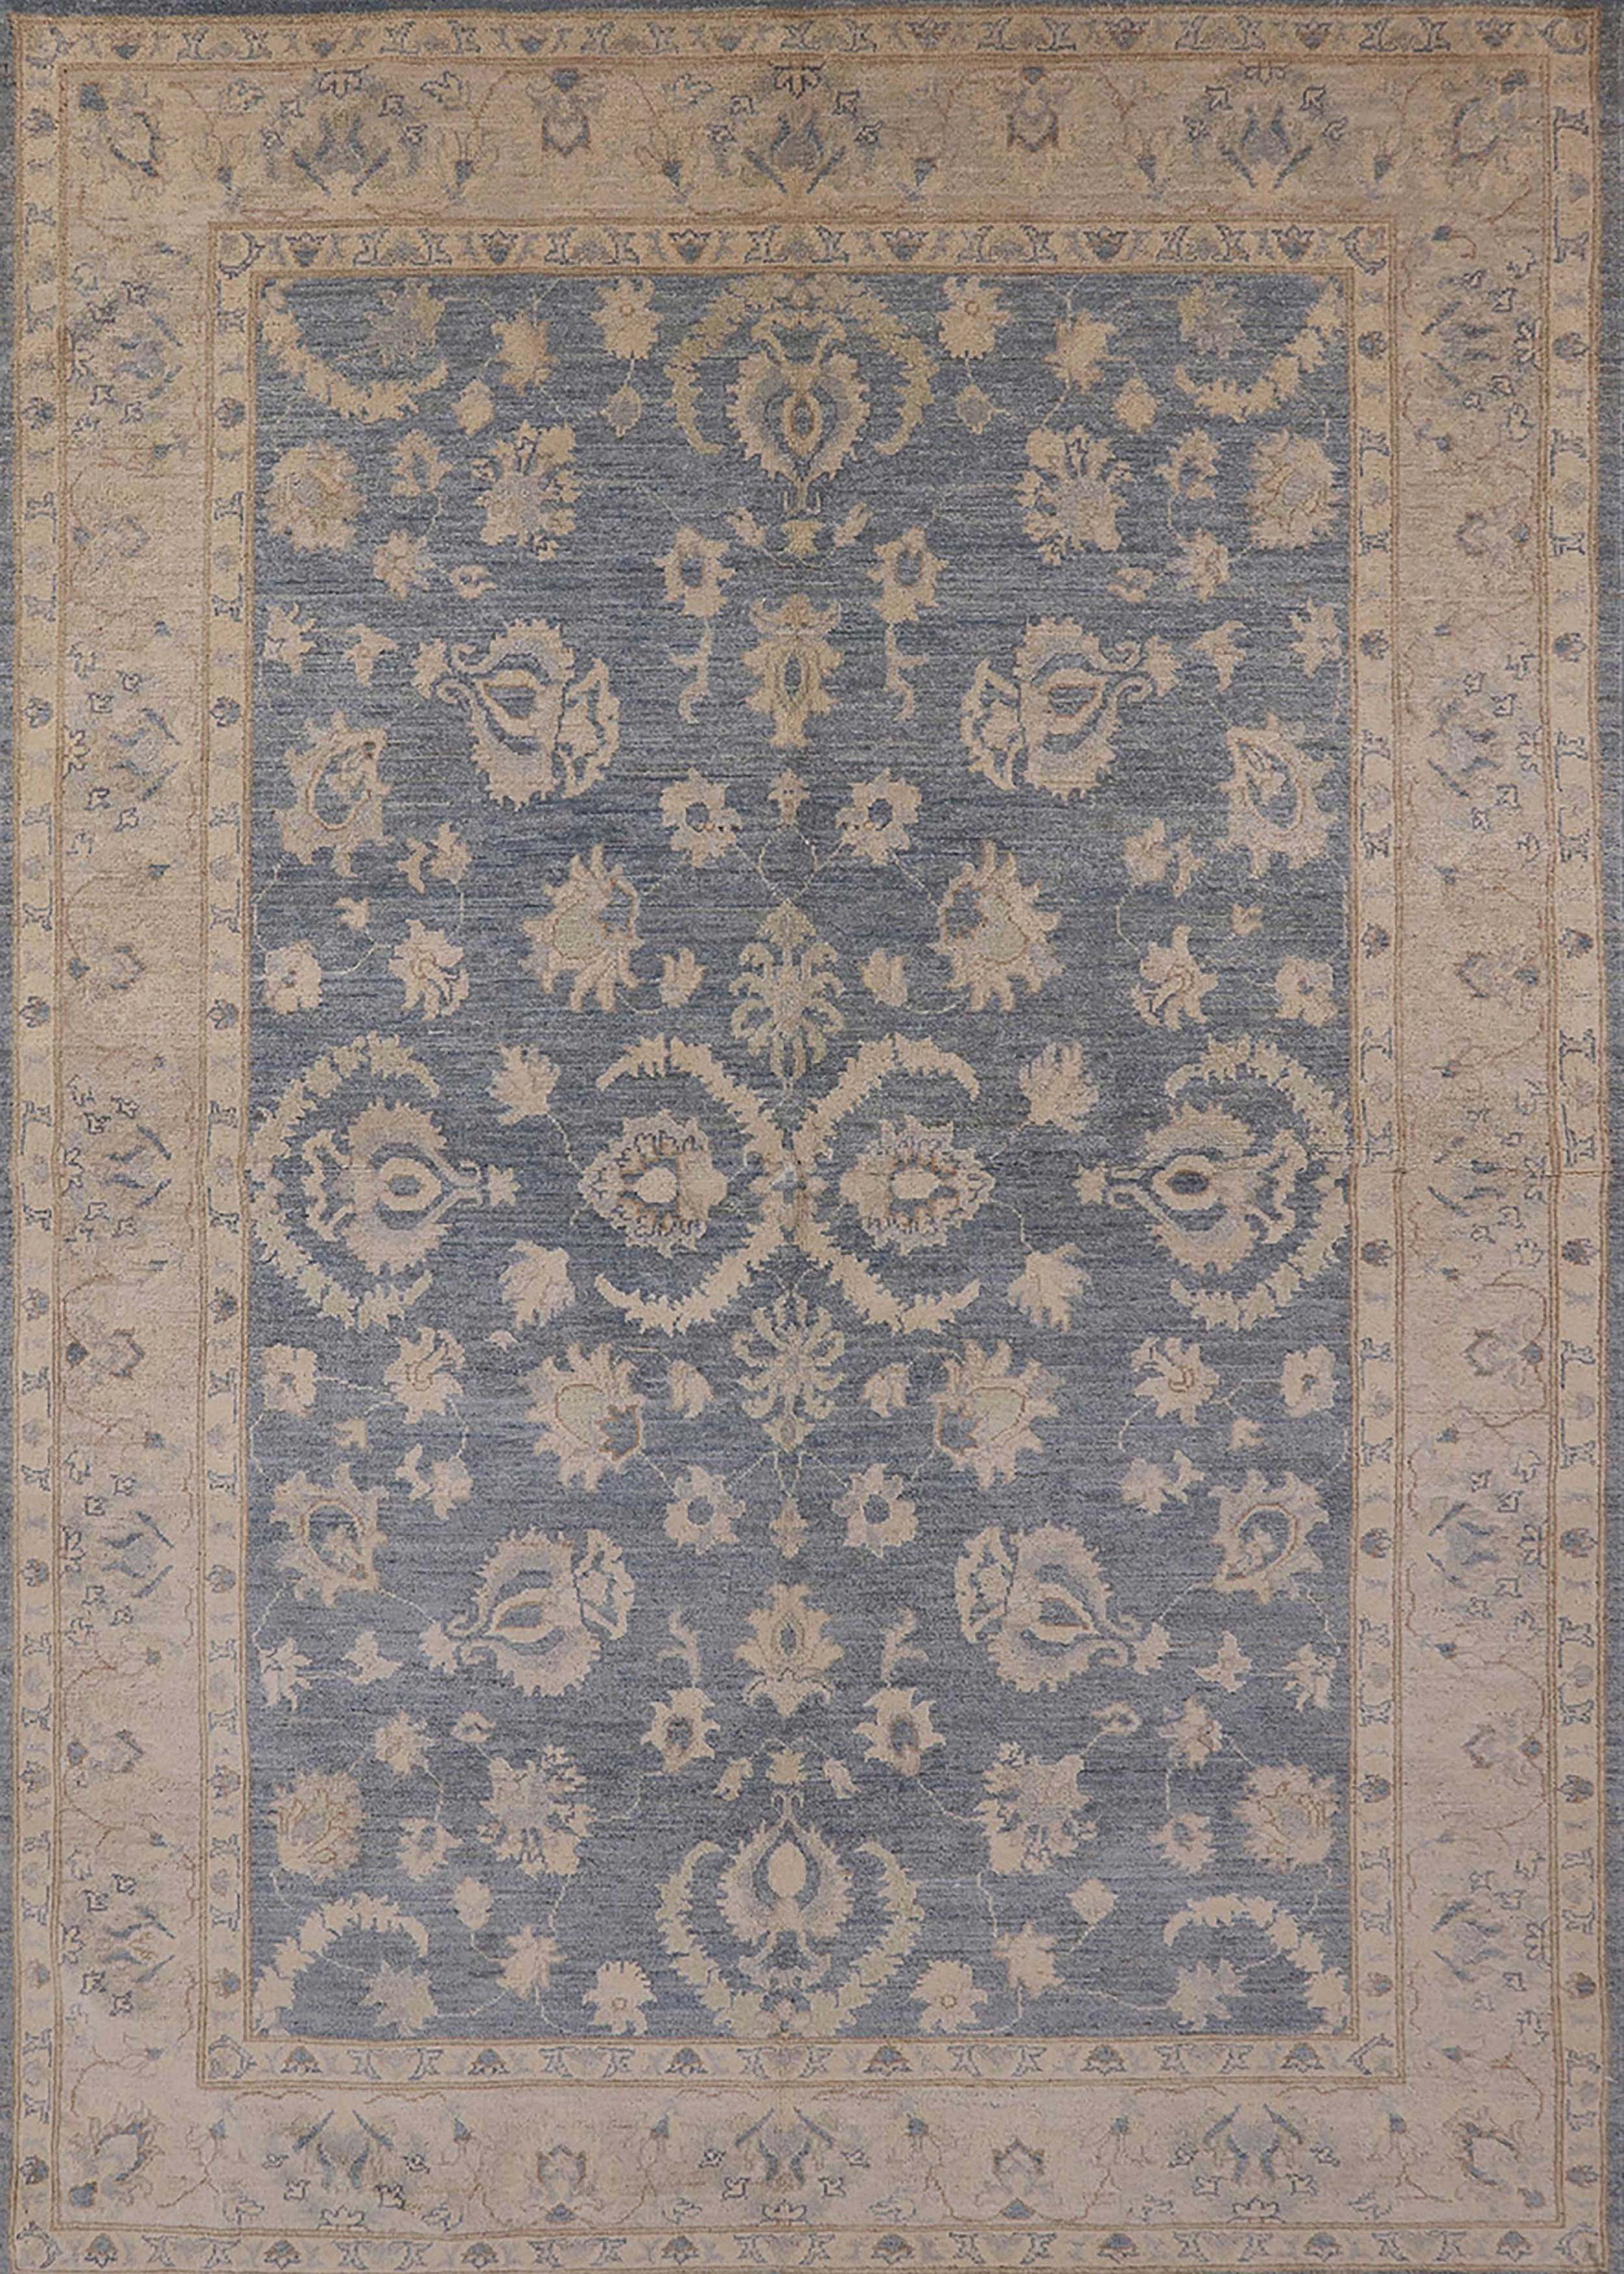 LGN10495 Ladole Rugs Pasific Cream Brown Blue Bordered Vintage Style Area Rug 6'7 X 9'2 